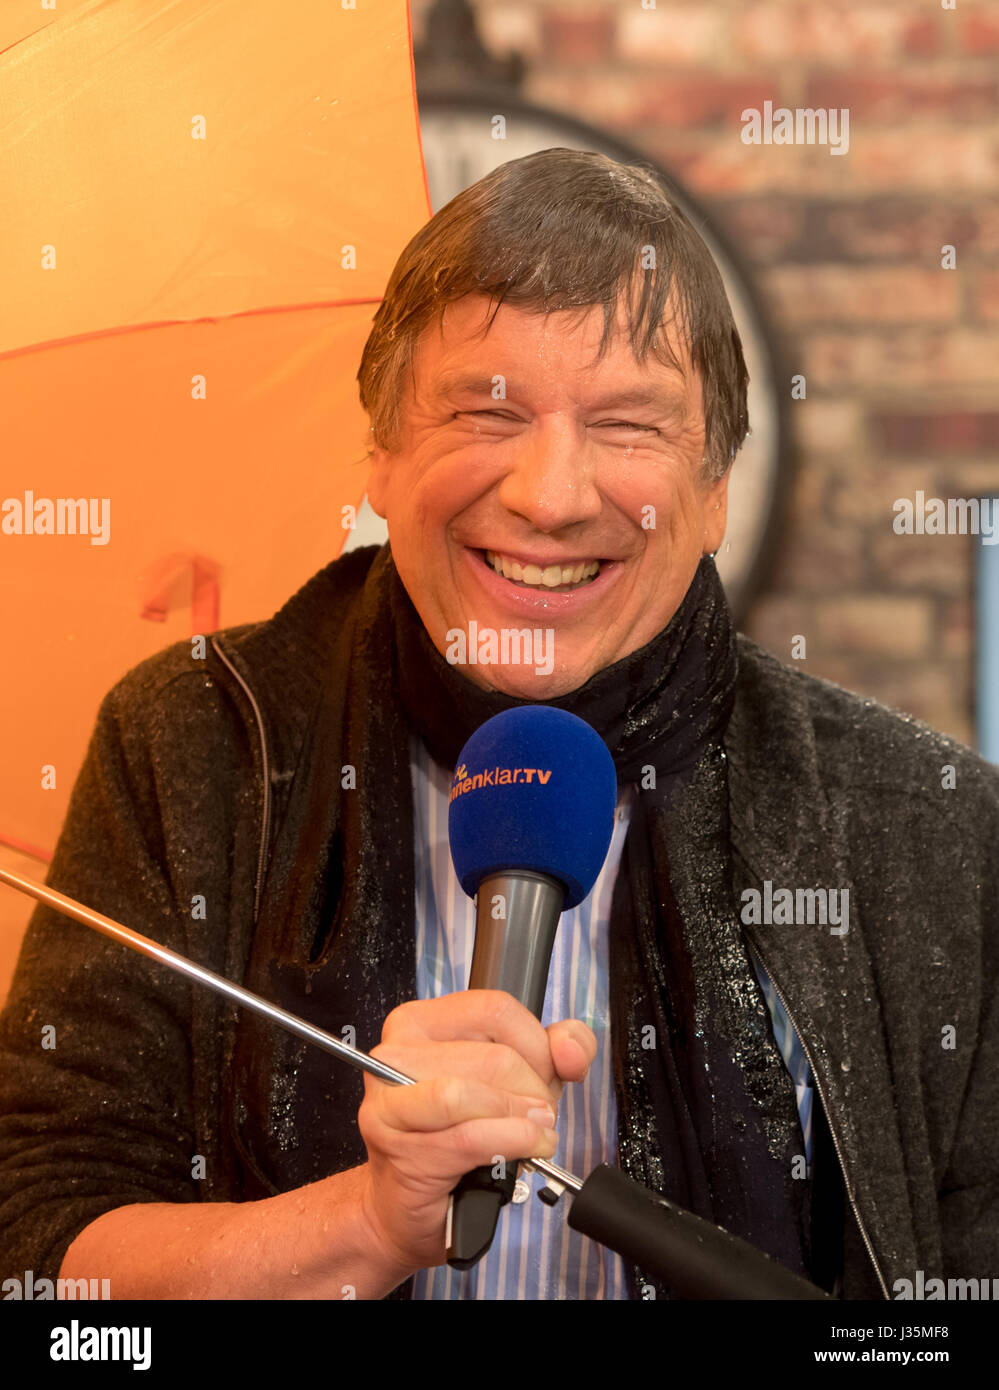 Munich, Germany. 03rd May, 2017. Weather presenter Jorg Kachelmann laughs at the TV studio of the sonnenklar.TV station in Munich, Germany, 03 May 2017. On 04 May Kachelmann will present the 'Kachelmannwetter' show, which will air once monthly. Photo: Tobias Hase/dpa/Alamy Live News Stock Photo